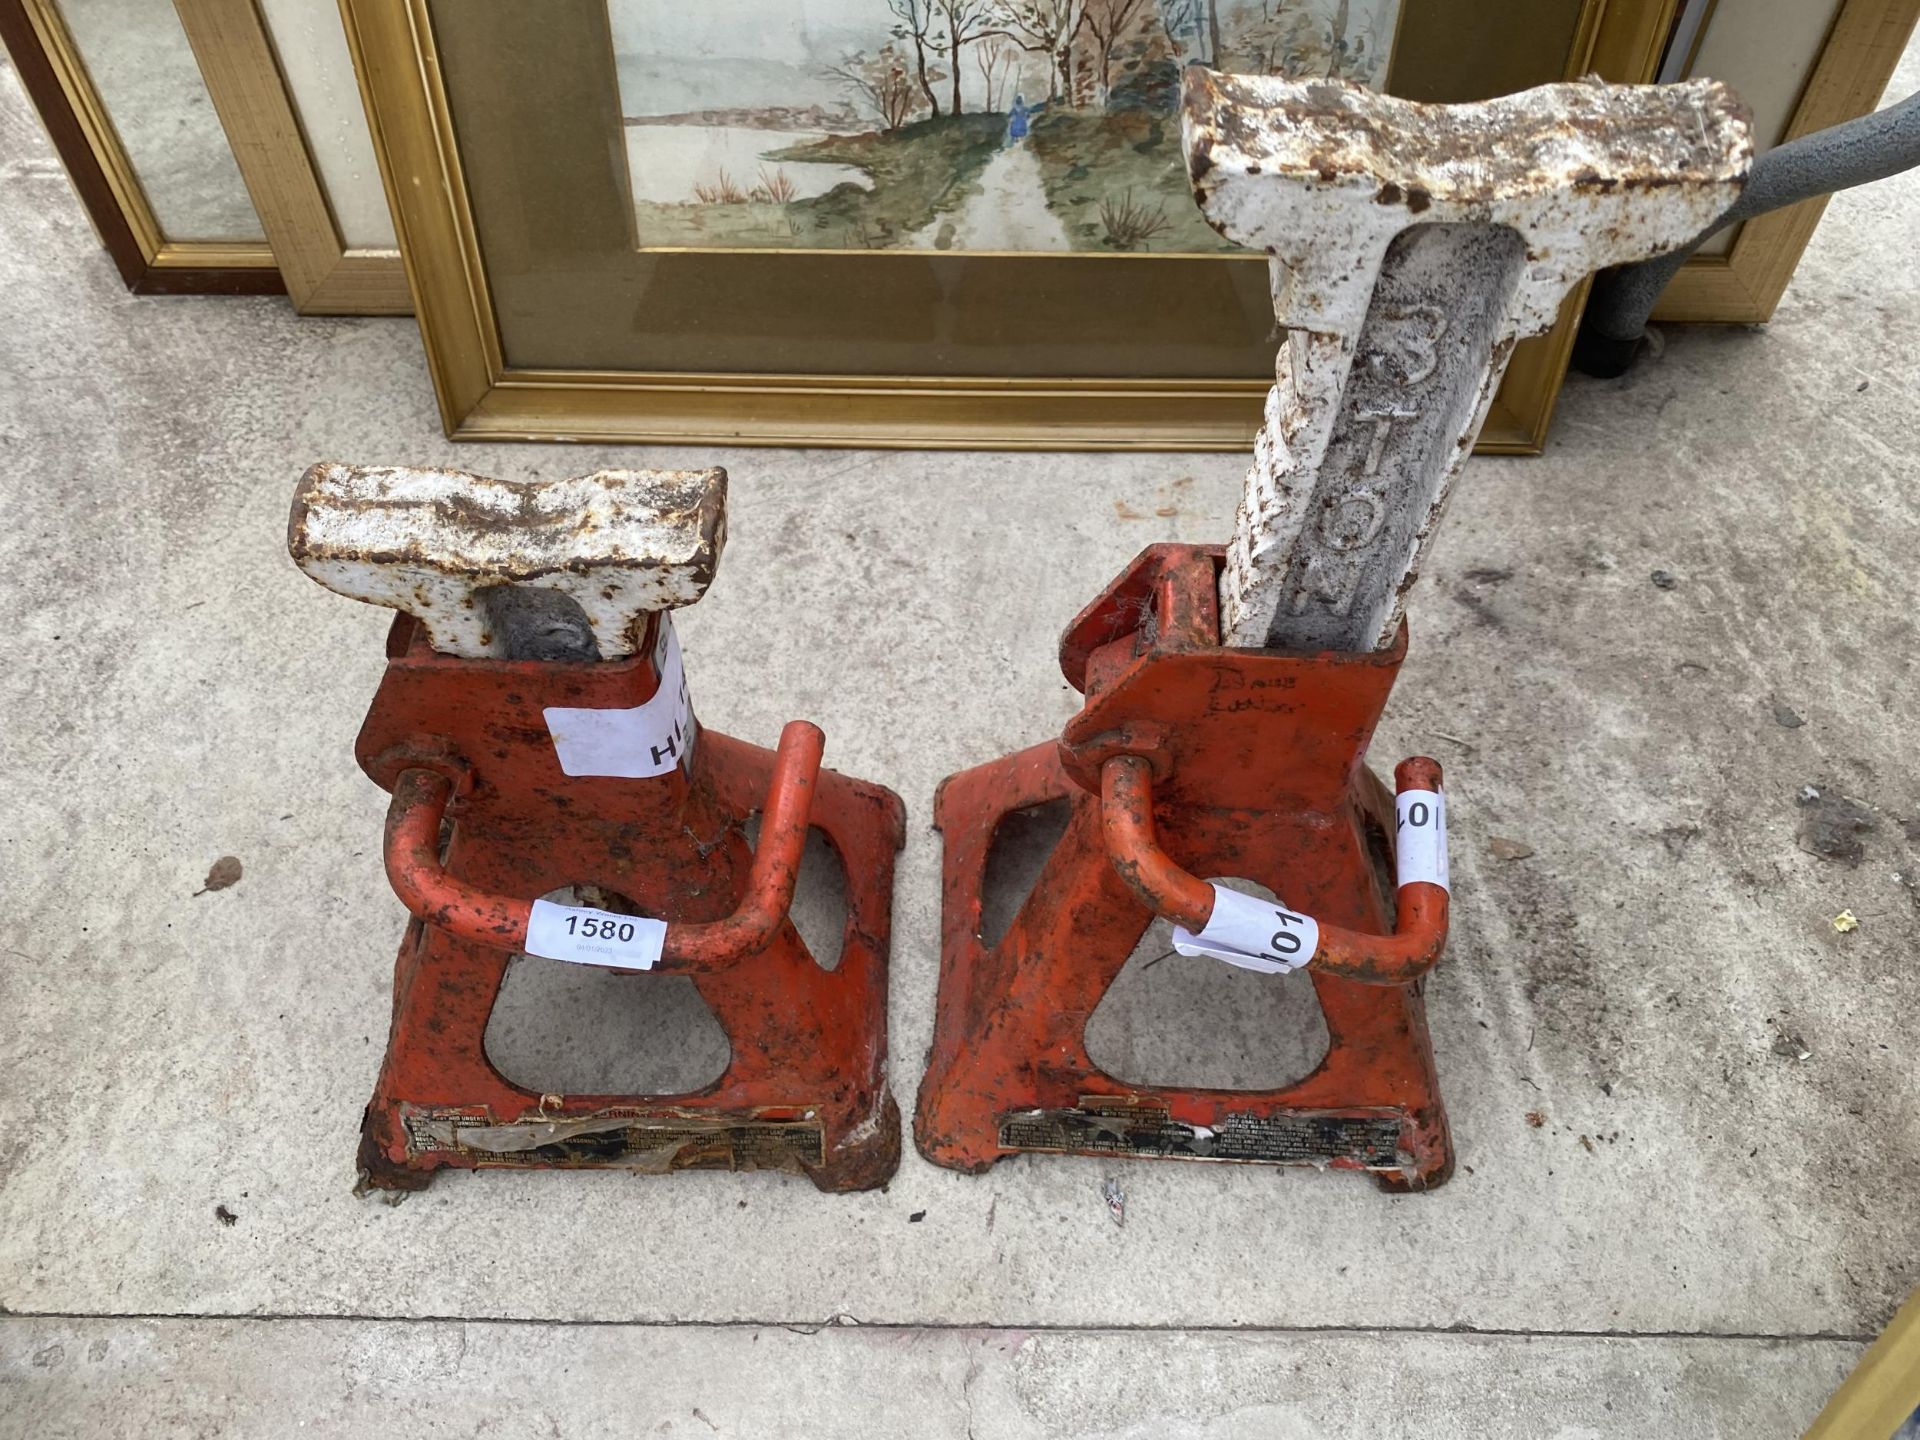 A PAIR OF AXEL STANDS